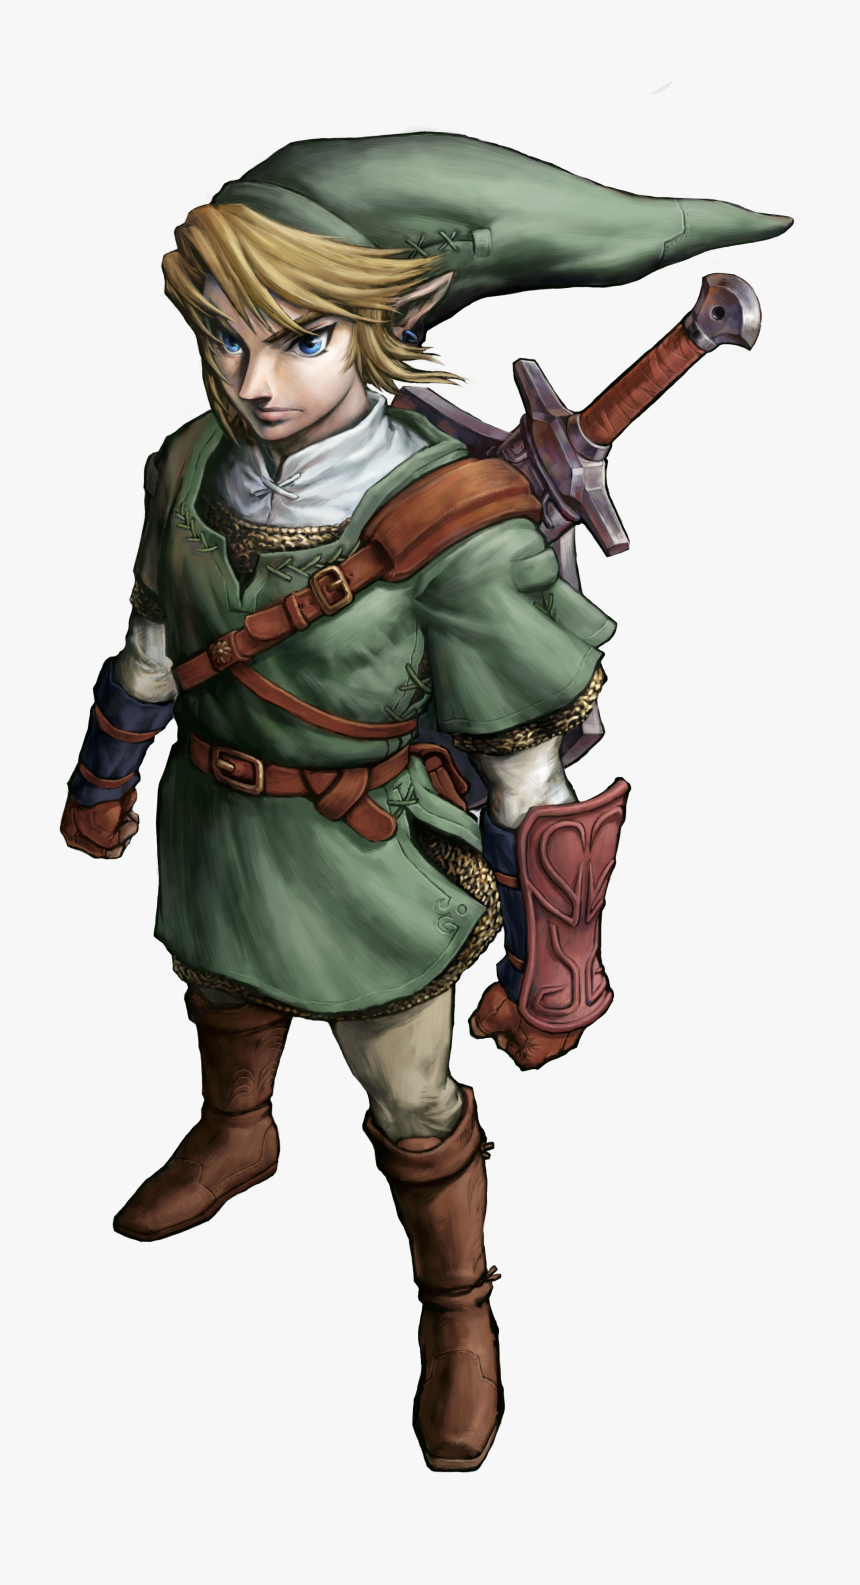 Link From Twilight Princess